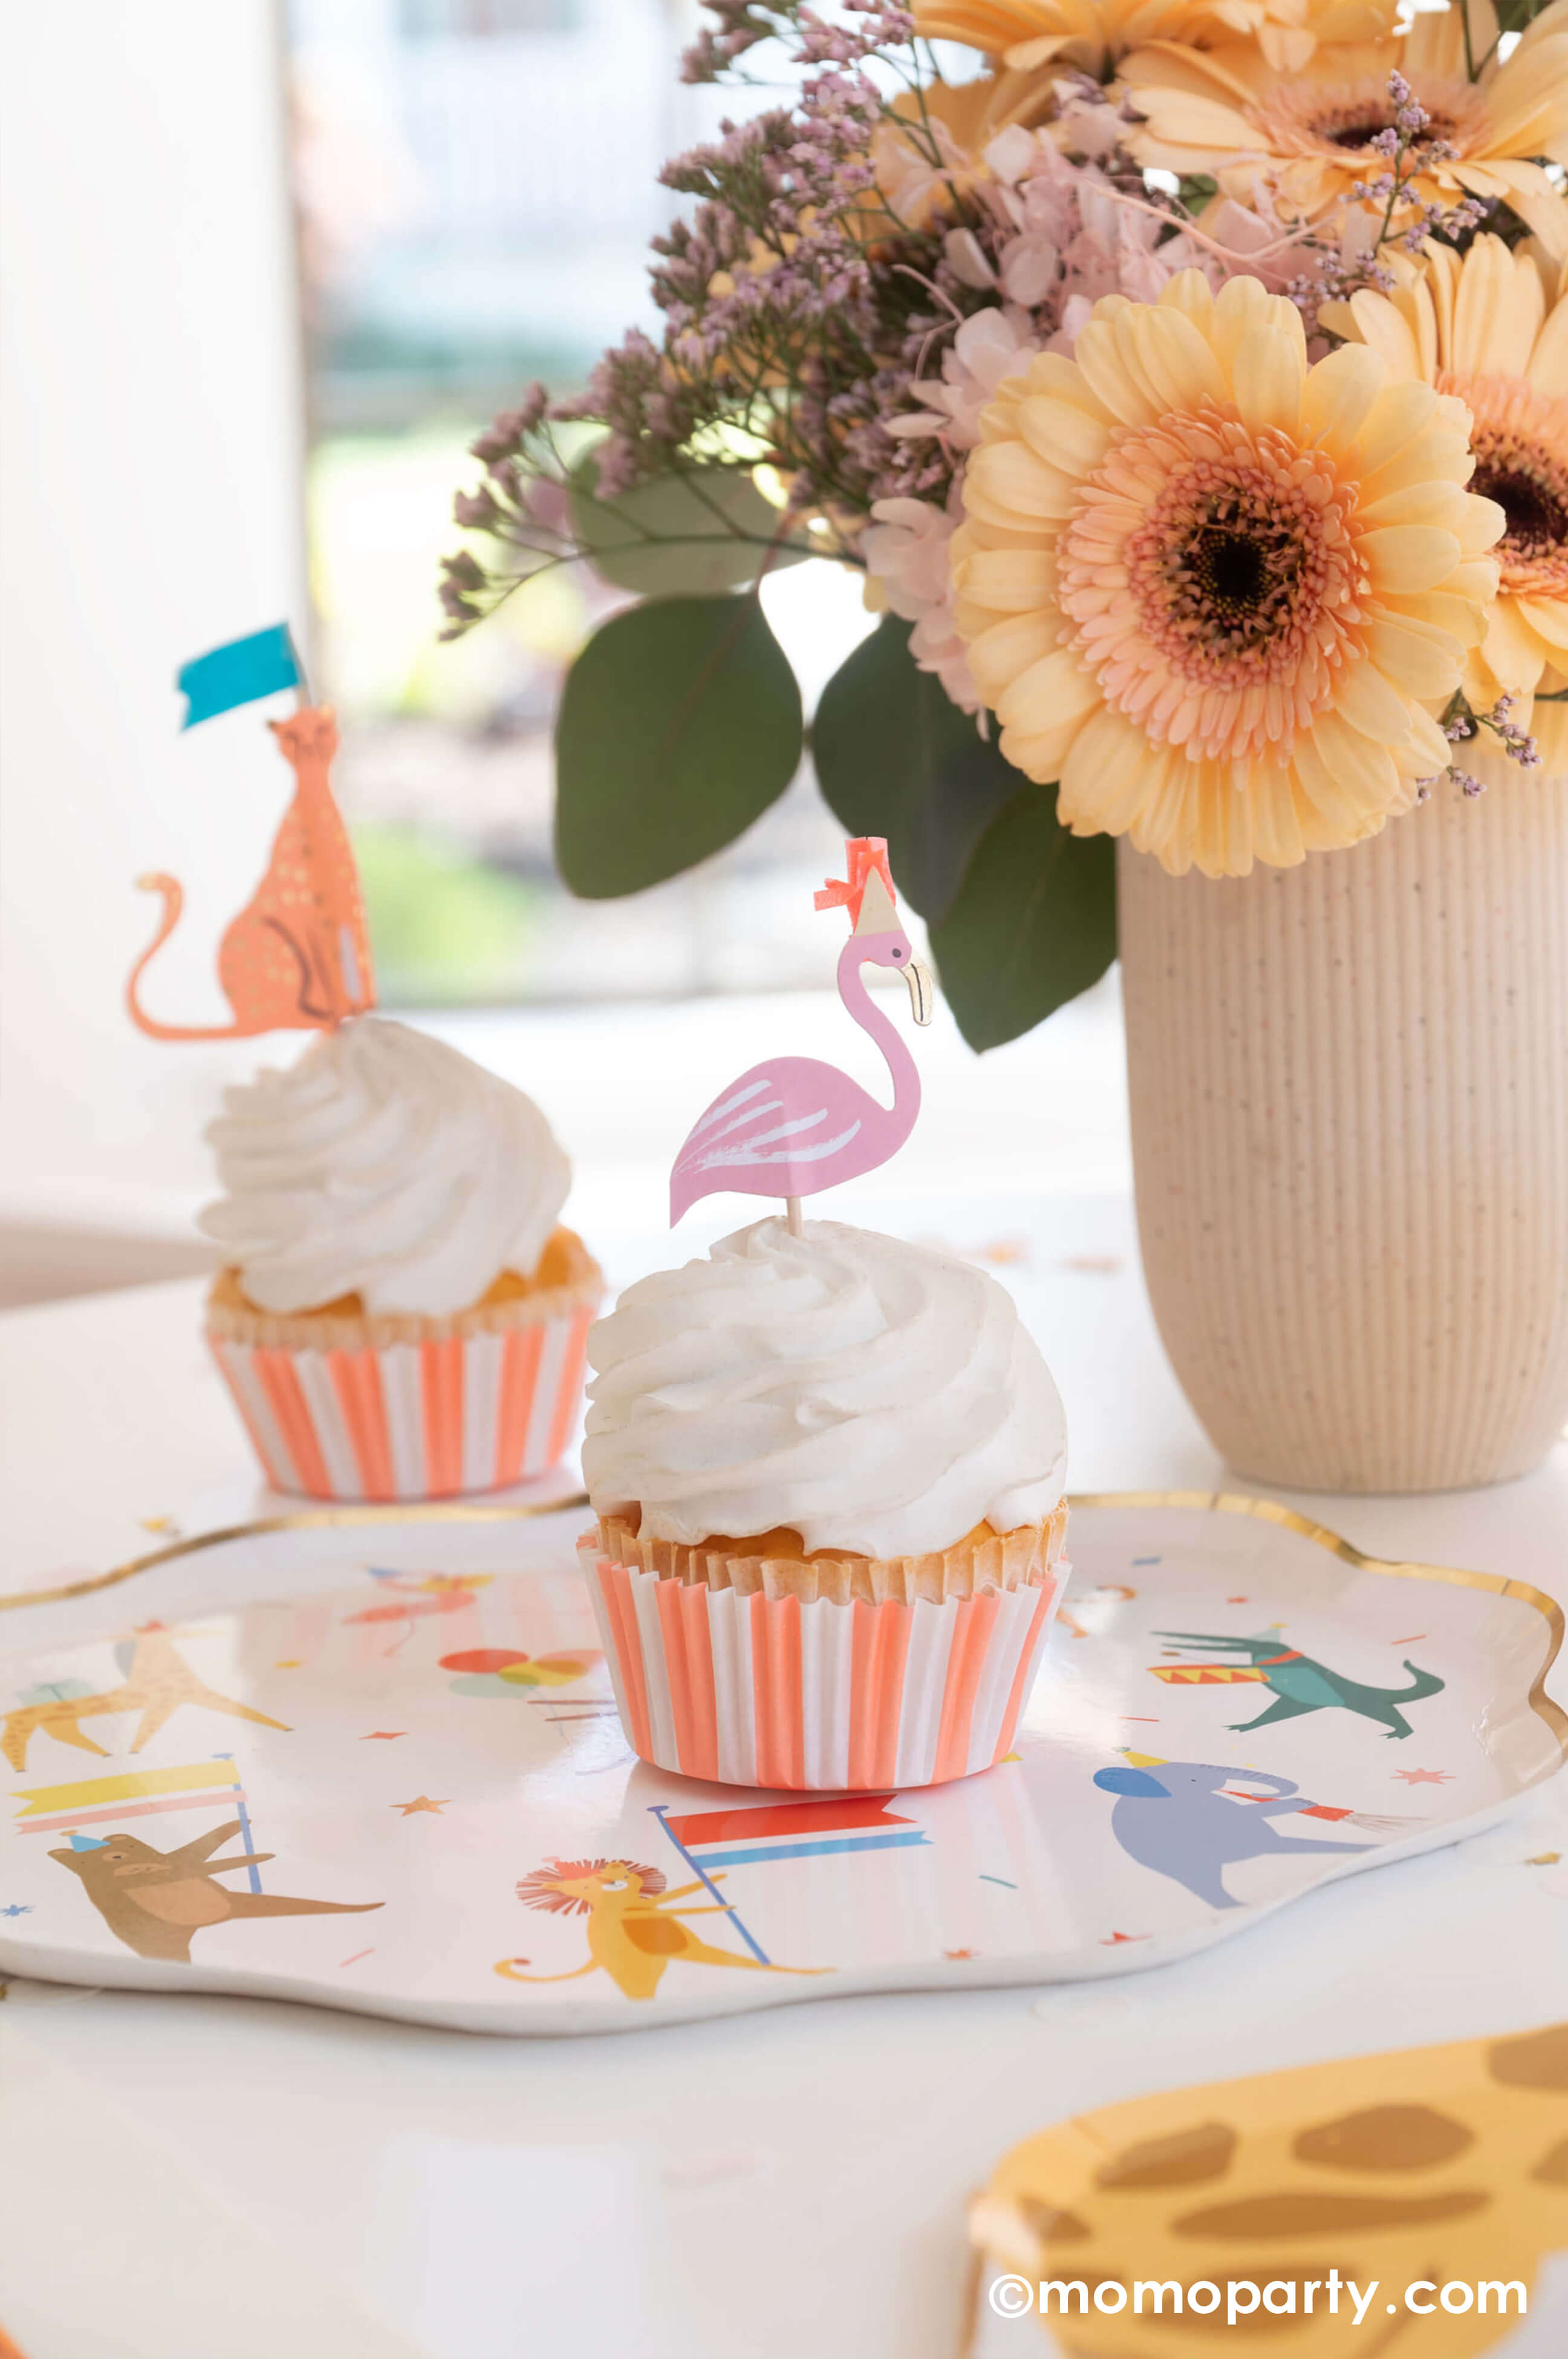 A kid's animal themed party table featuring Momo Party's Animal Parade Dinner plate, a giraffe shaped plate for cakes, and adorable safari animal cupcake toppersby Meri Meri, and Rifle Paper Co's party animal guest napkins with a cute illustration of an elephant with a party hat and bunch of festive balloons, along with light yellow striped cups and wooden utensil, it makes a great party inspiration for kid's animal, safari, carnival themed birthday party.